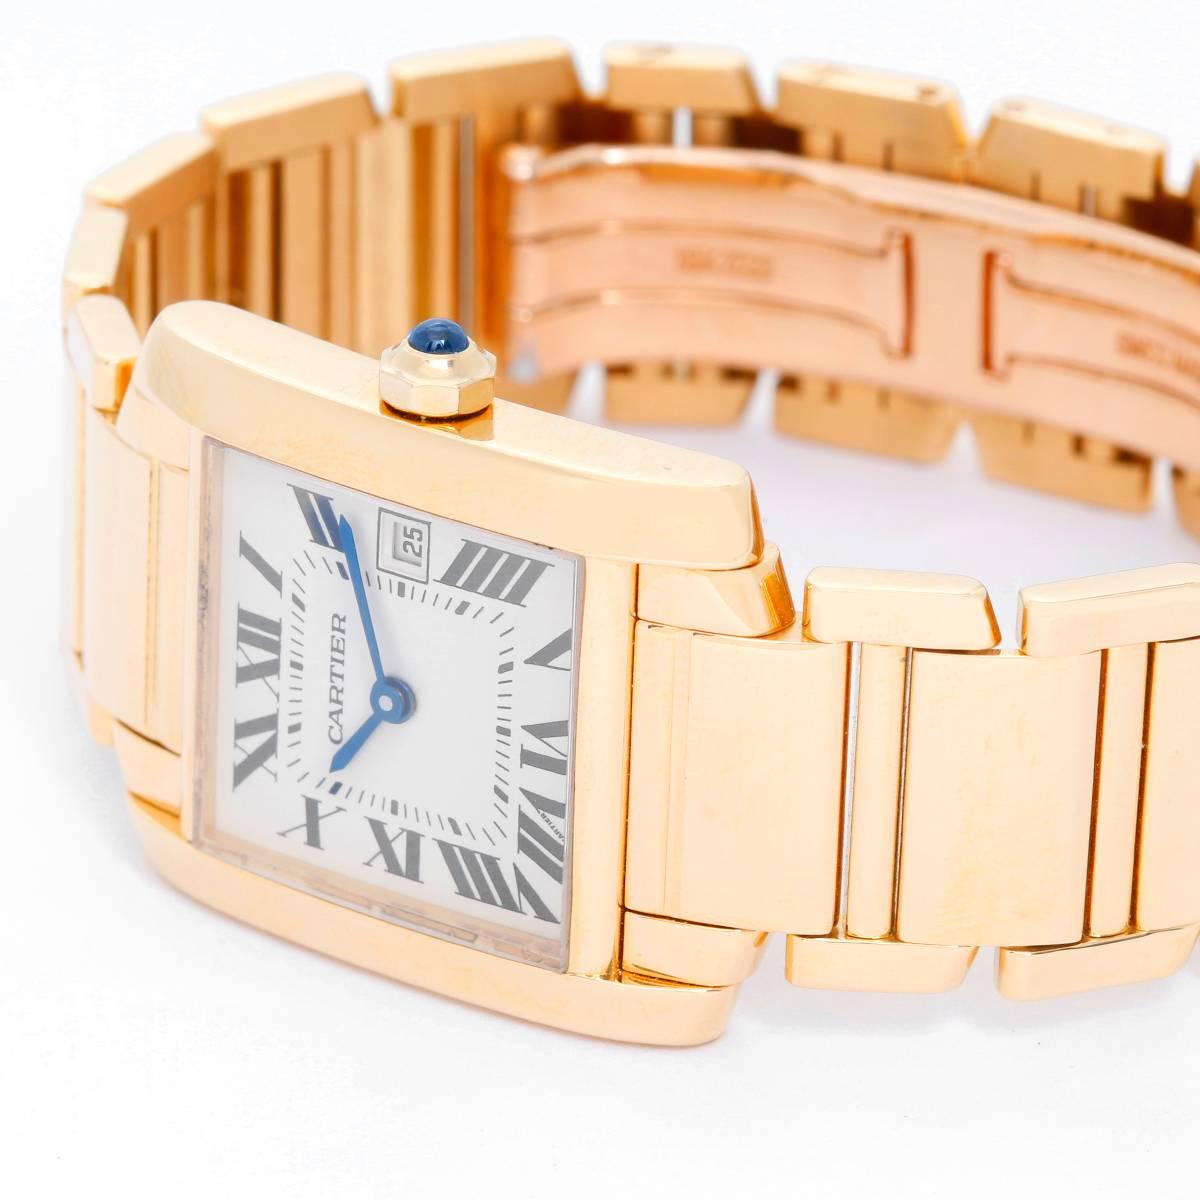 Cartier Tank Francaise Midsize 18k Yellow Gold Men's/Ladies Watch W50014N2 -  Quartz. 18k yellow gold  case; blue sapphire cabochon crown (25mm x 30mm). Ivory colored dial with black Roman numerals; date at 3 o'clock. 18k yellow gold Cartier Tank